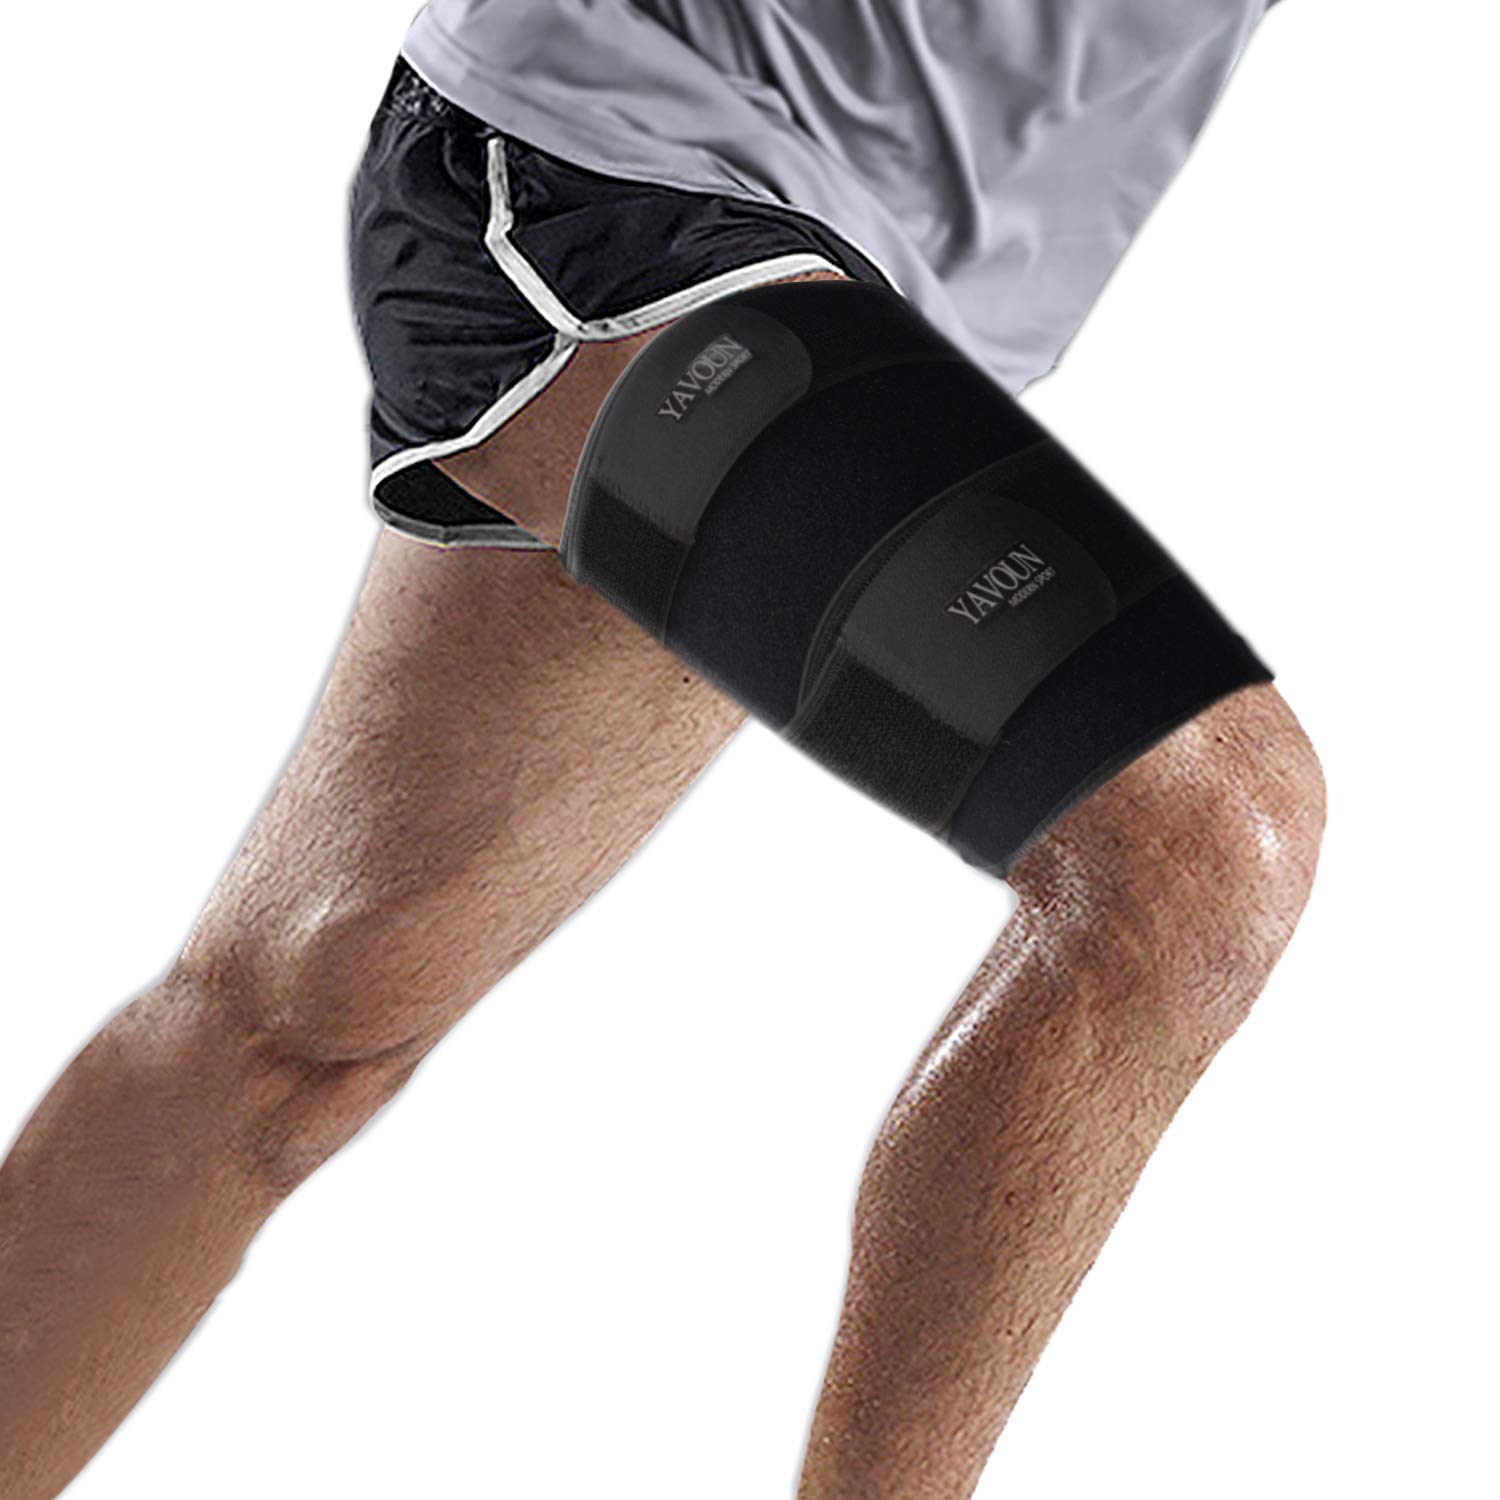 Thigh Support - Adjustable compression set for fitness sports 